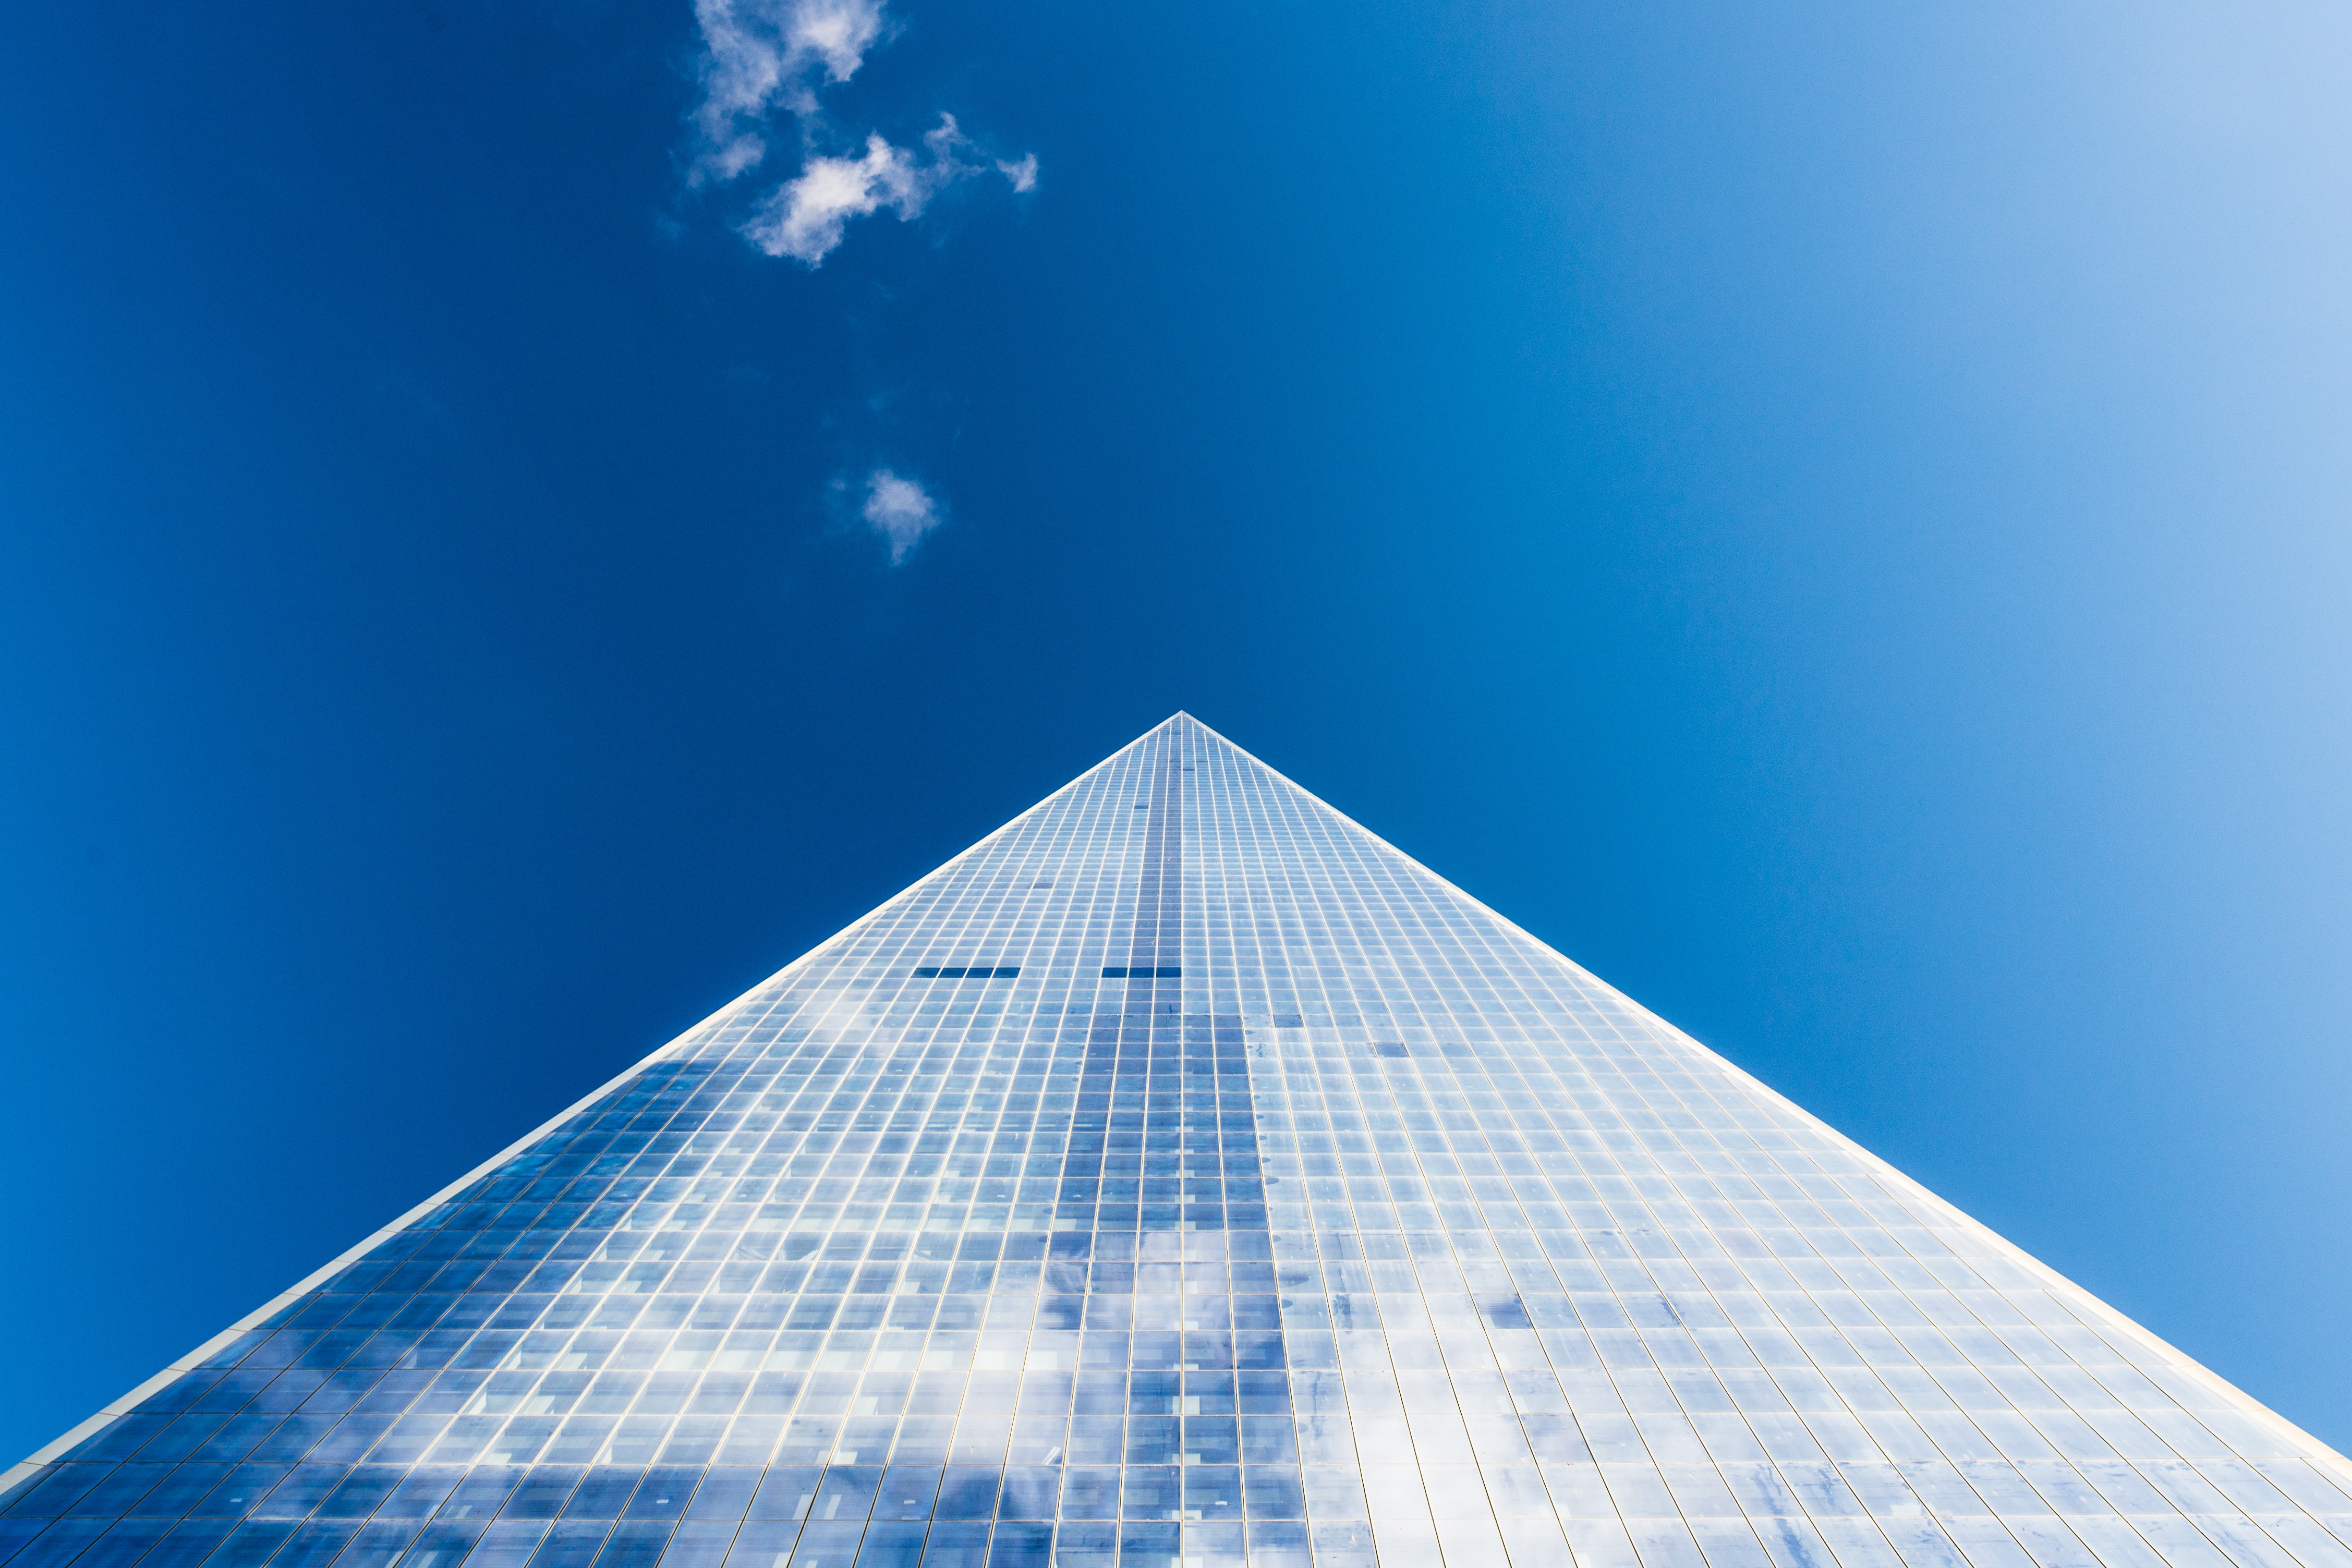 4510x3007 Free , blue, looking up, triangle, new york, office, window, tall, daytime, sunshine, blue sky, skyscraper, tower, abstract, pyramid, day, white, structure, sky, architecture, building Gallery HD Wallpaper